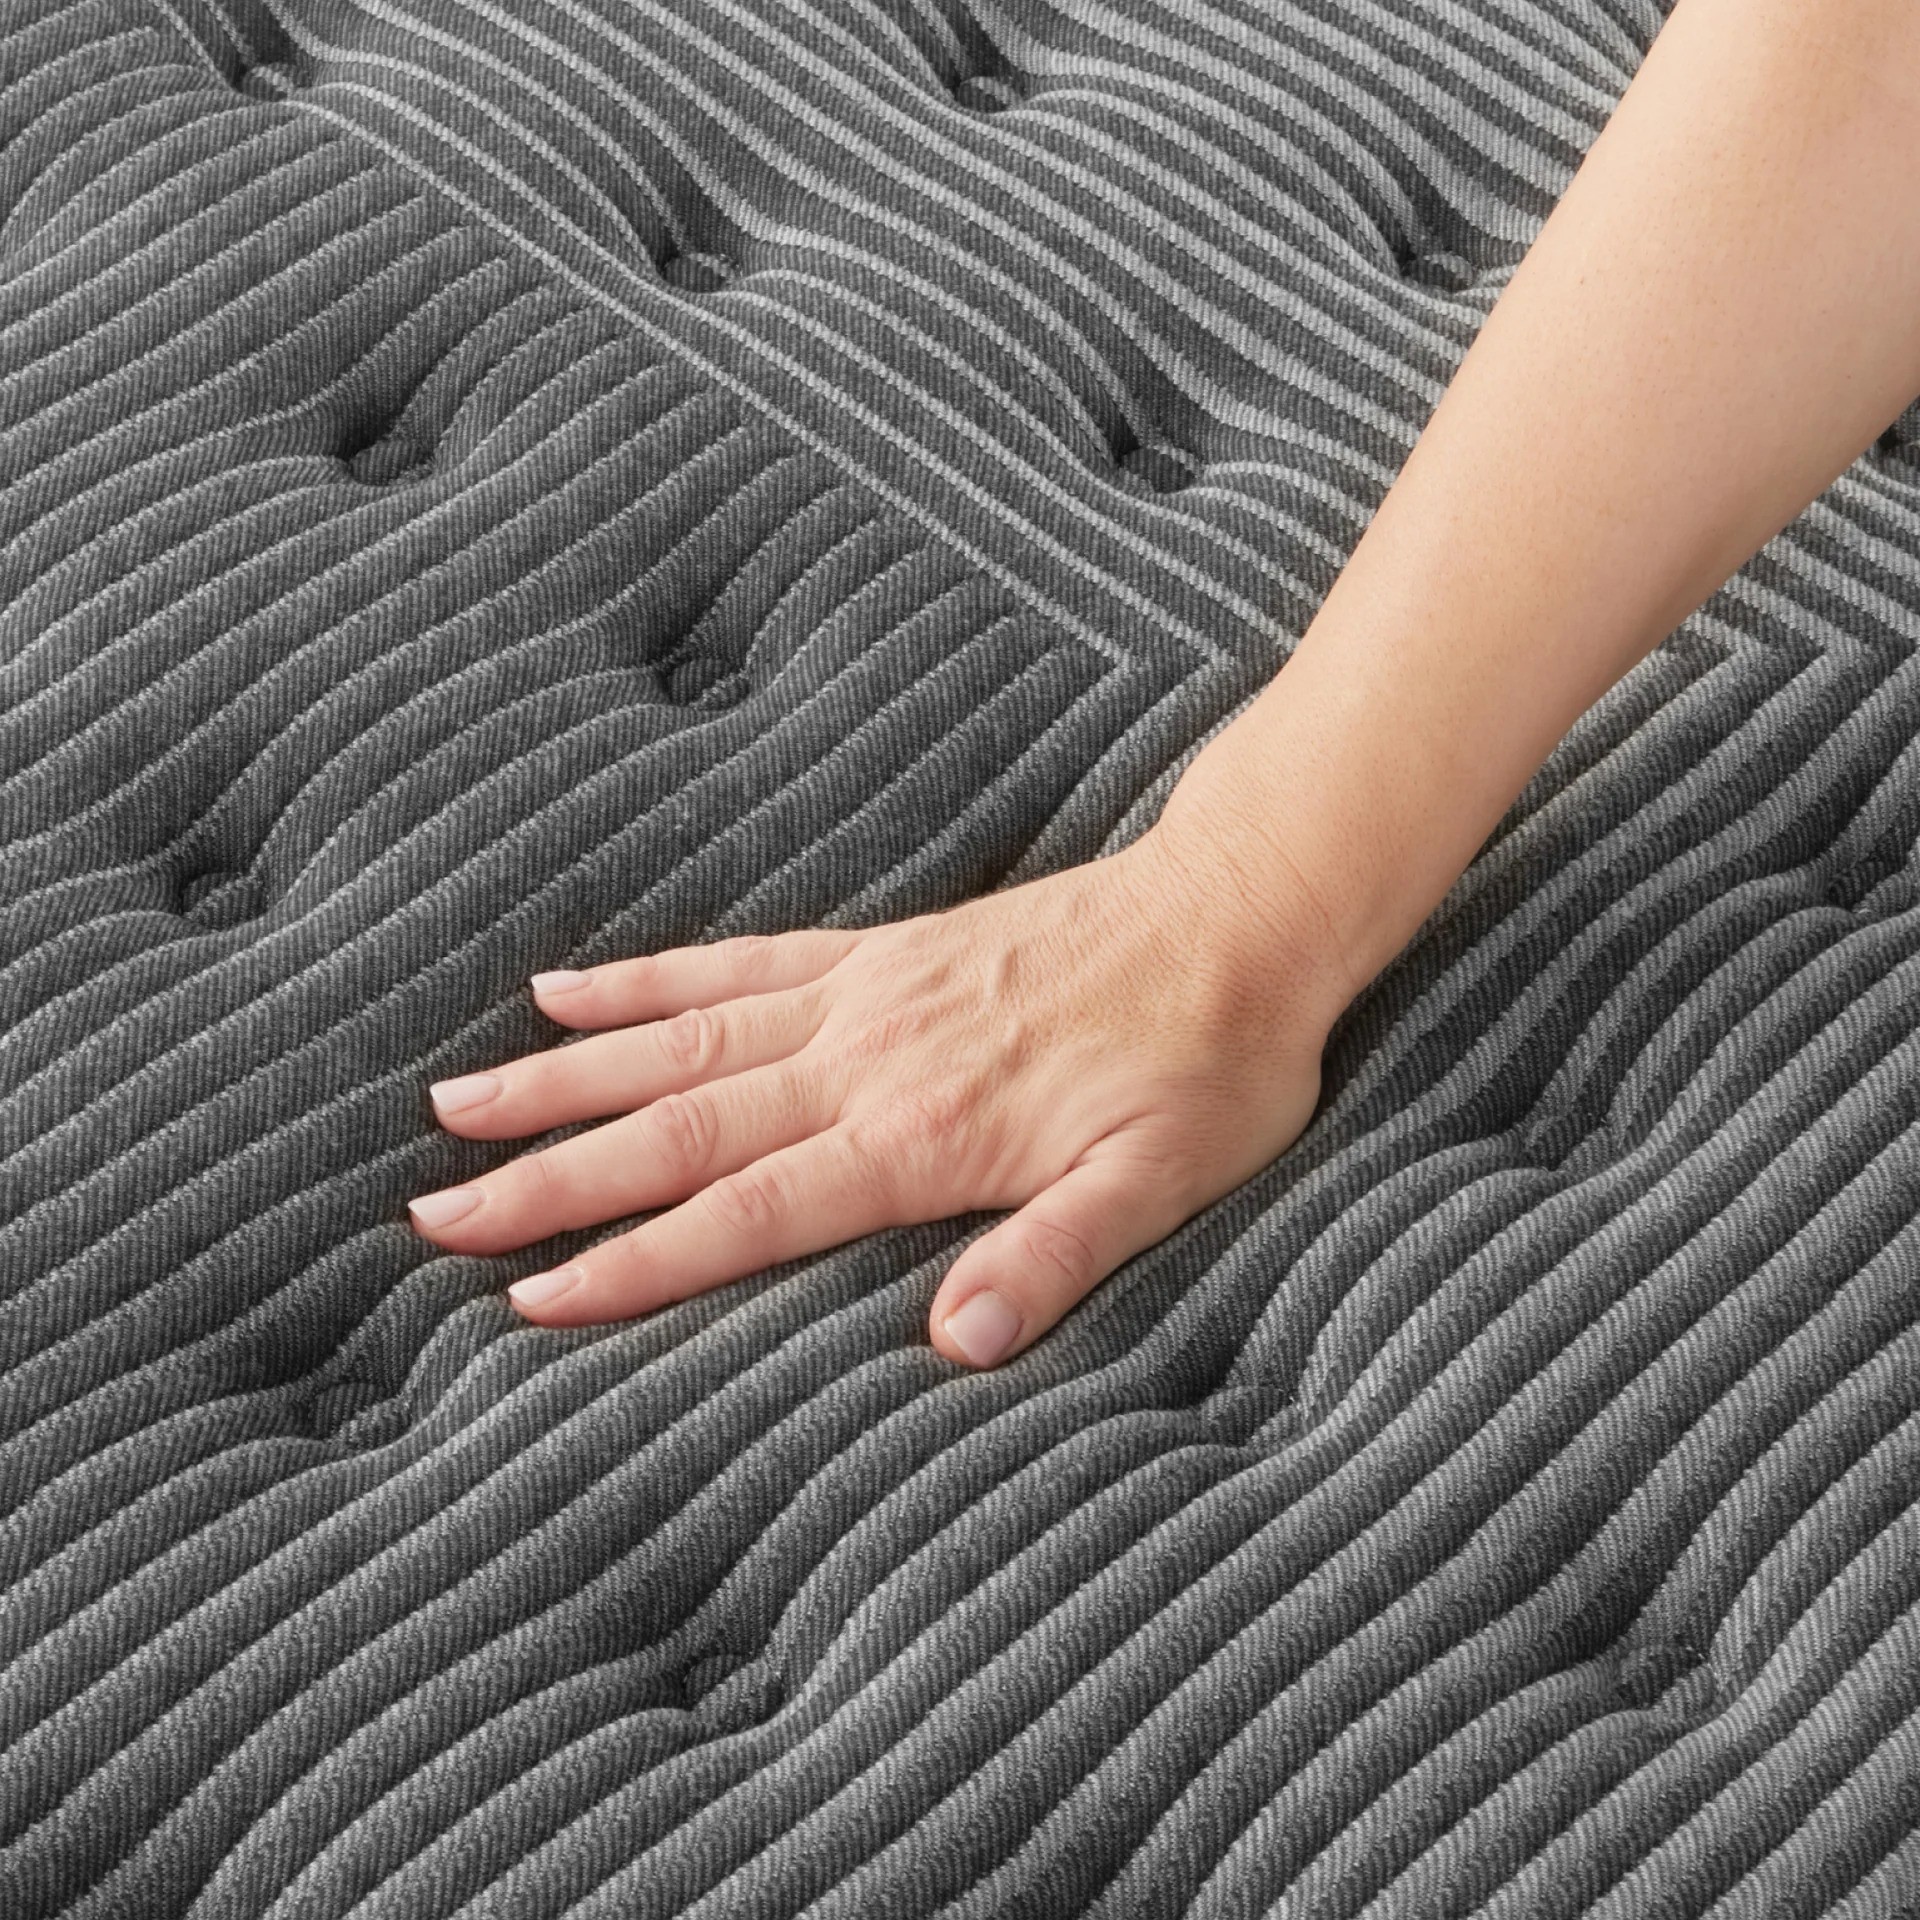 A close up image of the surface of a Beautyrest Black mattress